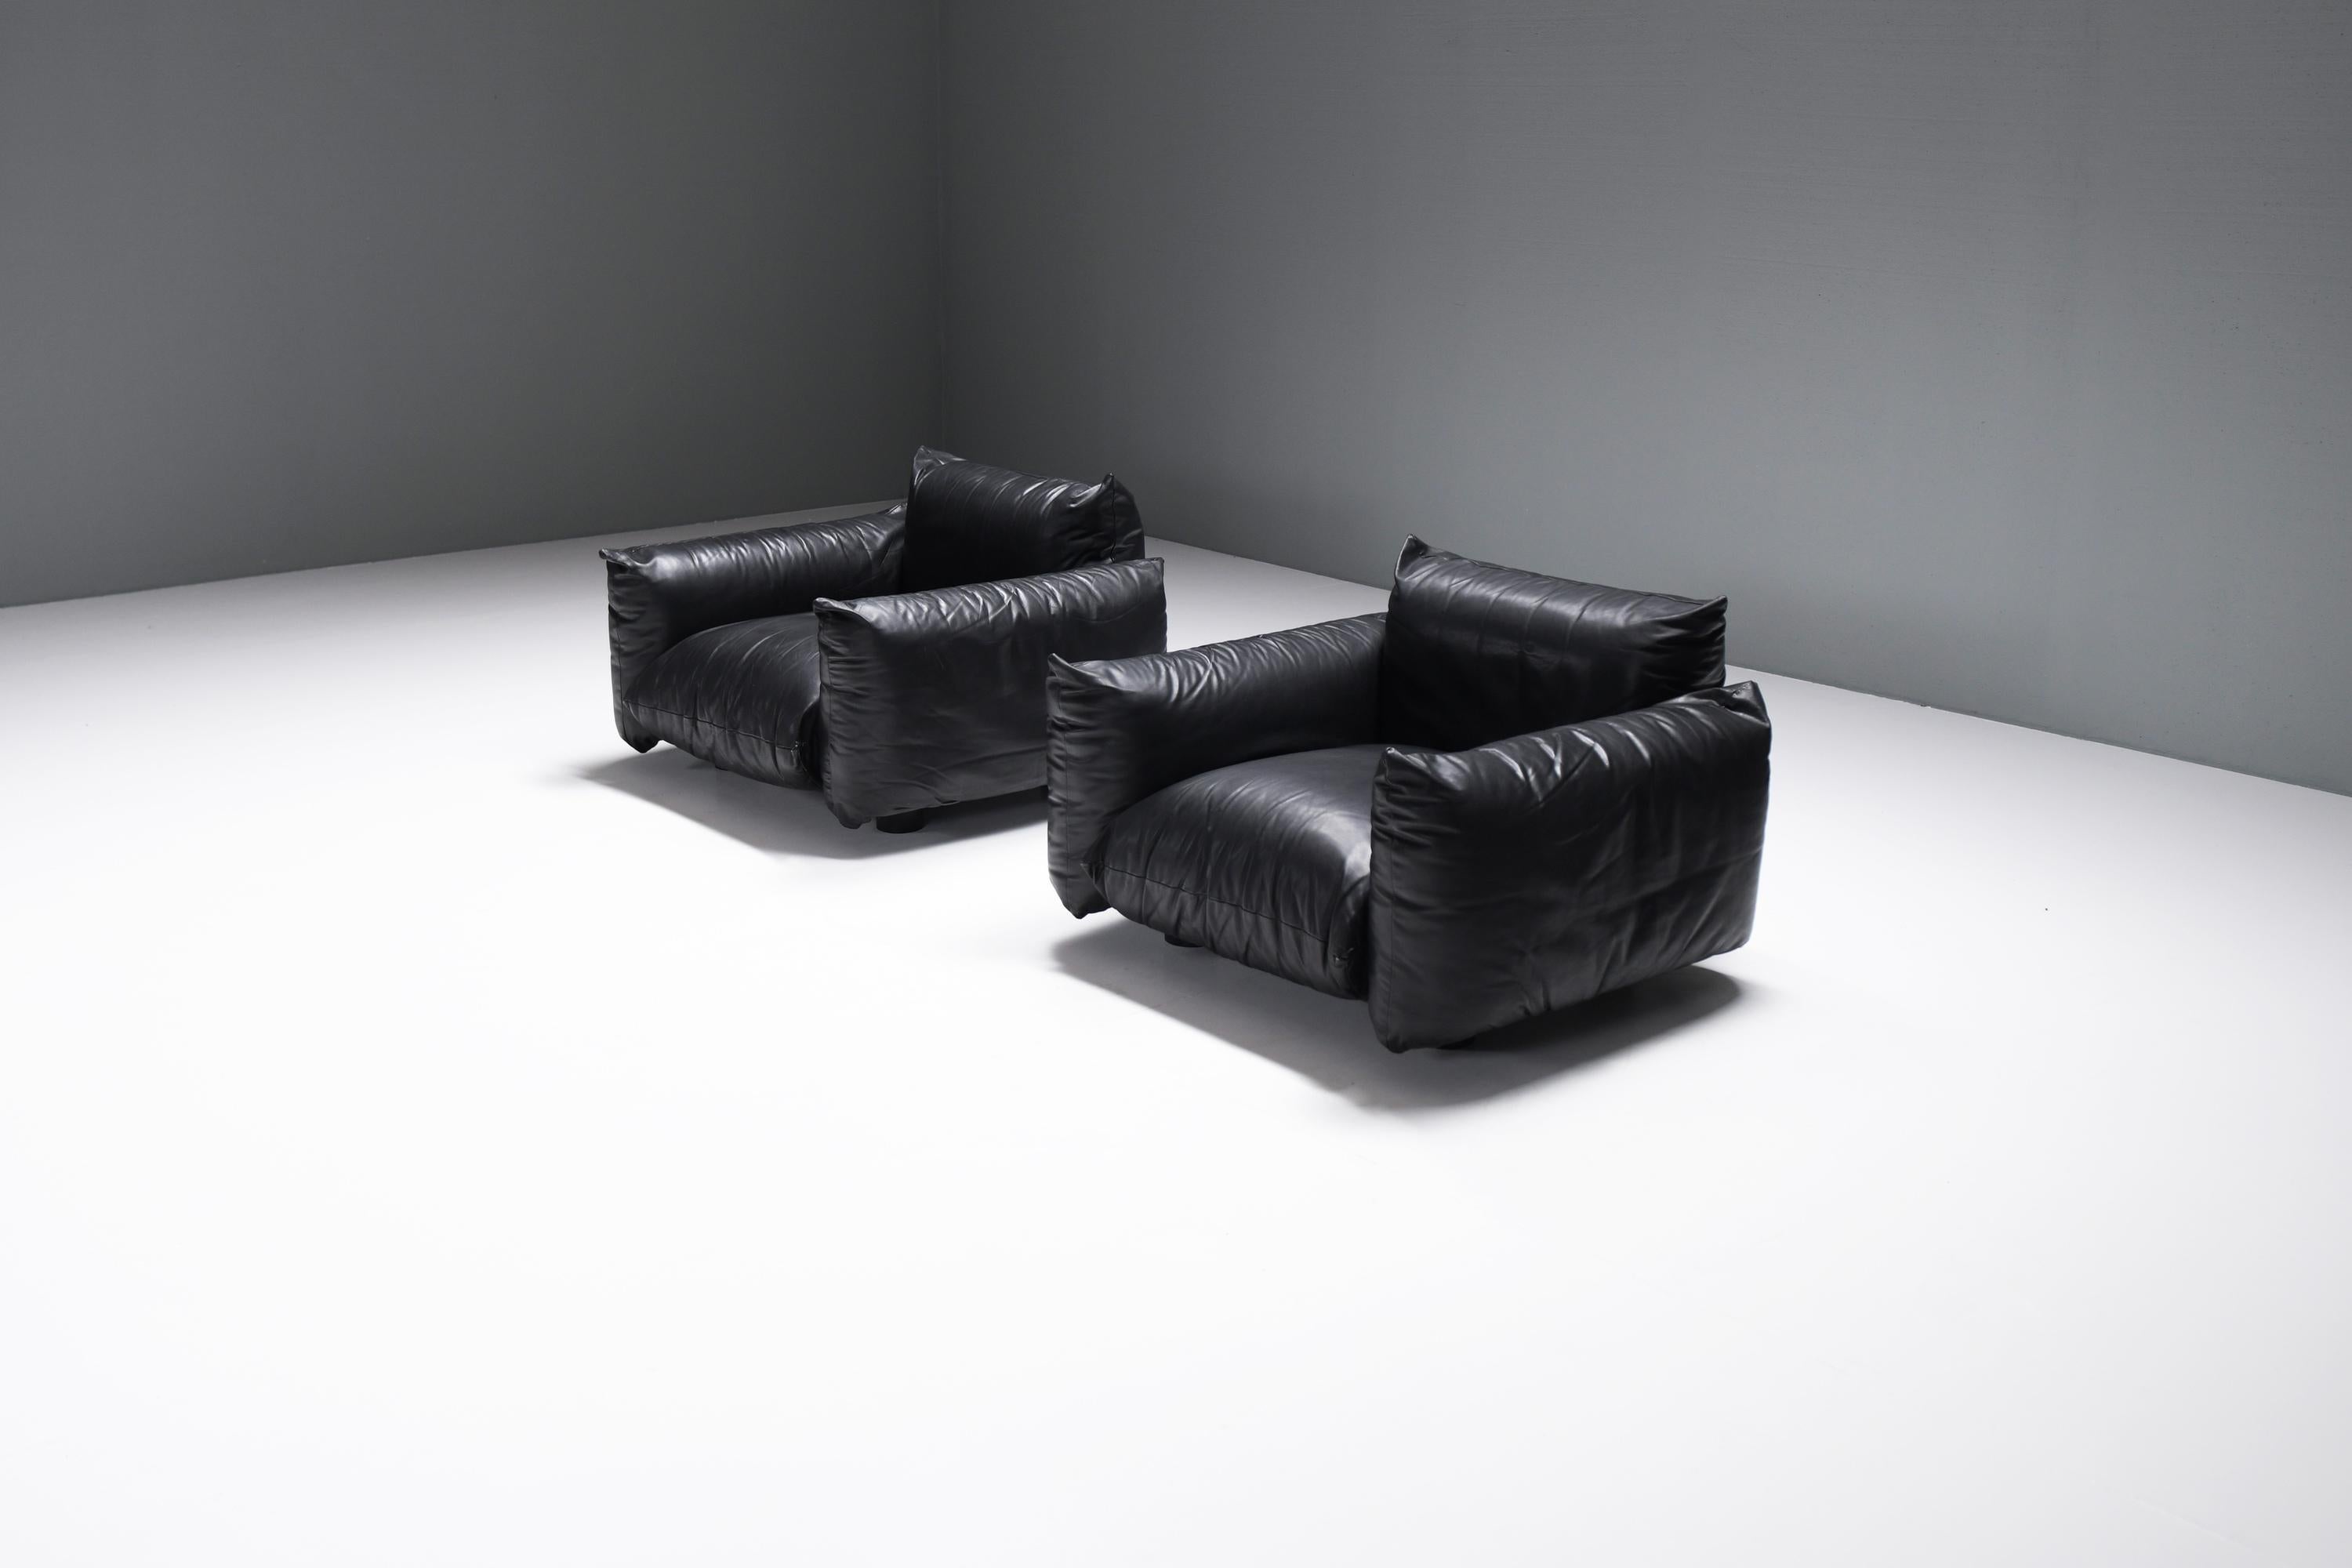 Italian Rare set of Marenco lounge chairs in leather by Mario Marenco for ARFLEX Italy